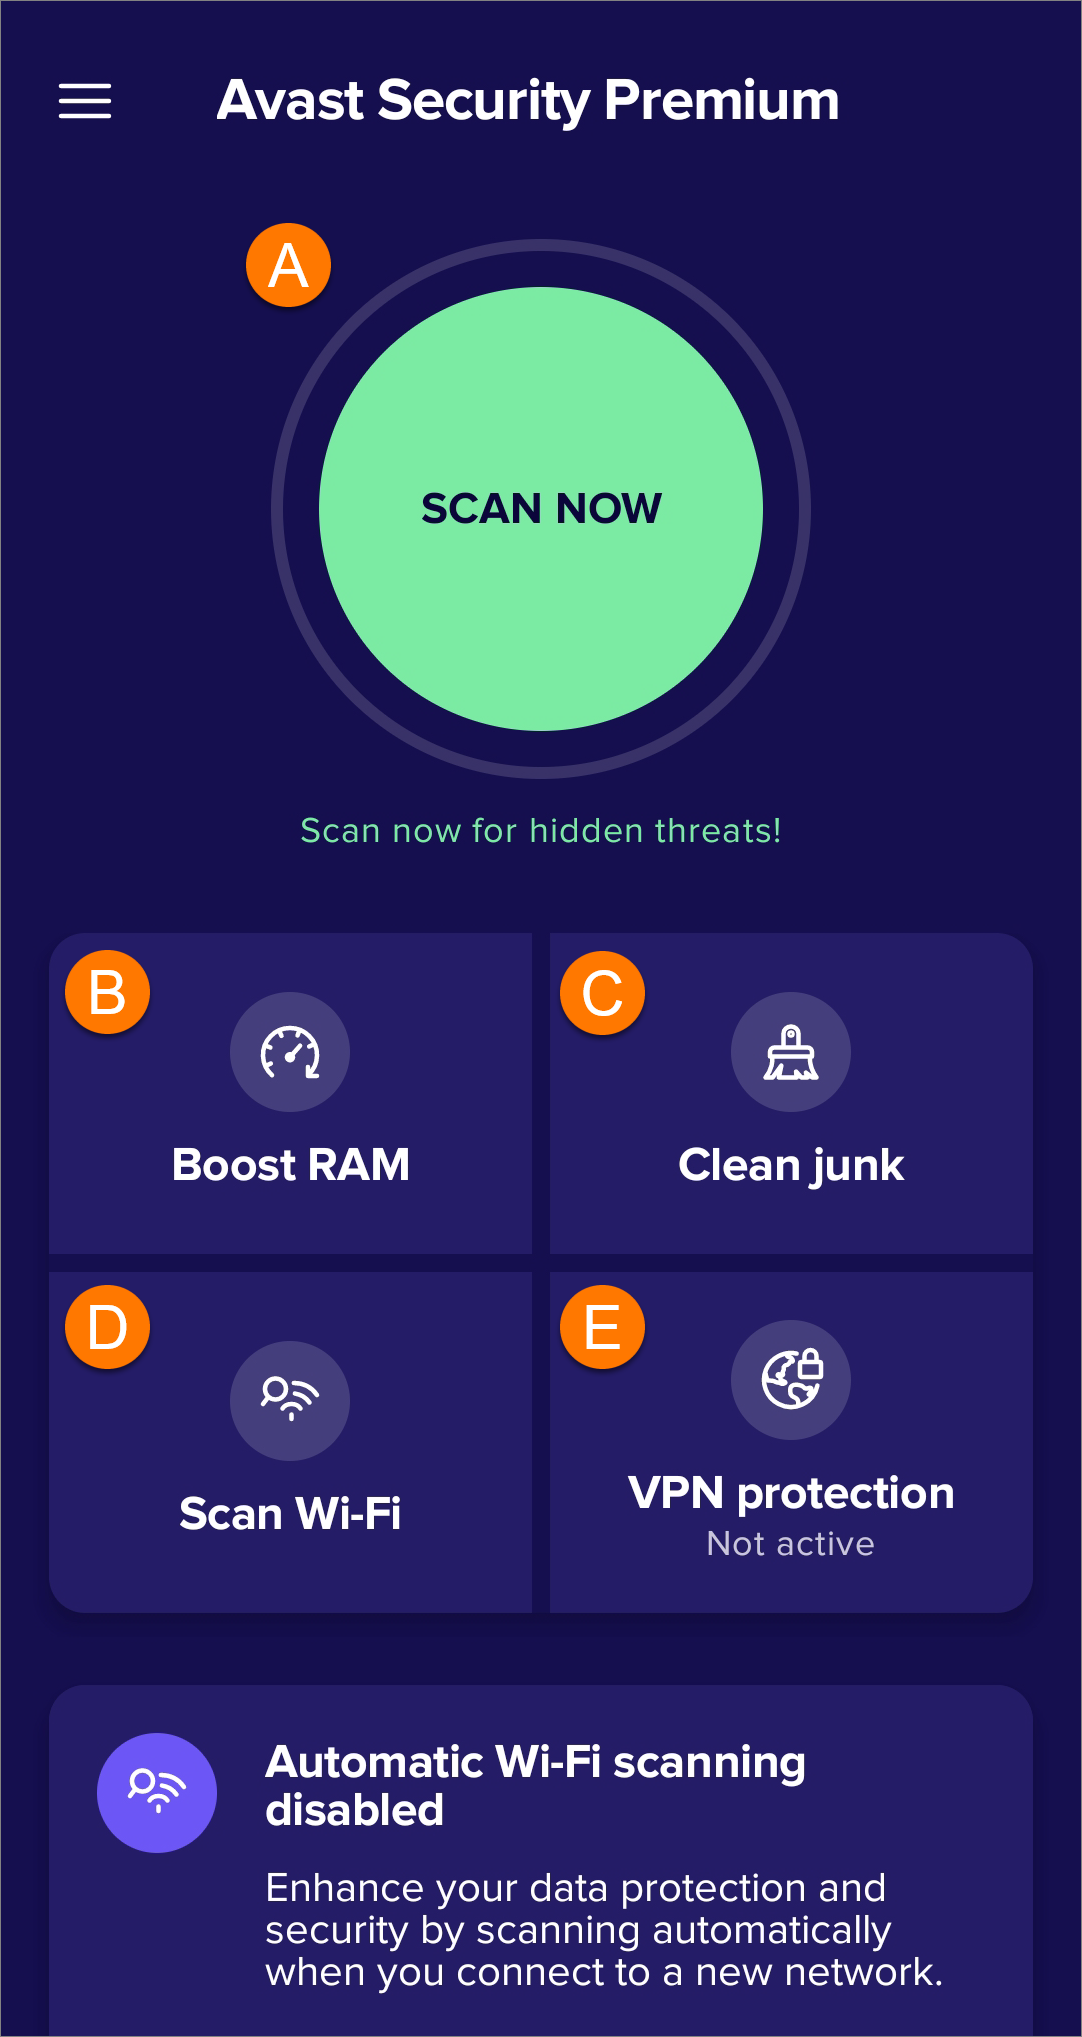 How to Avast Mobile Security for Avast